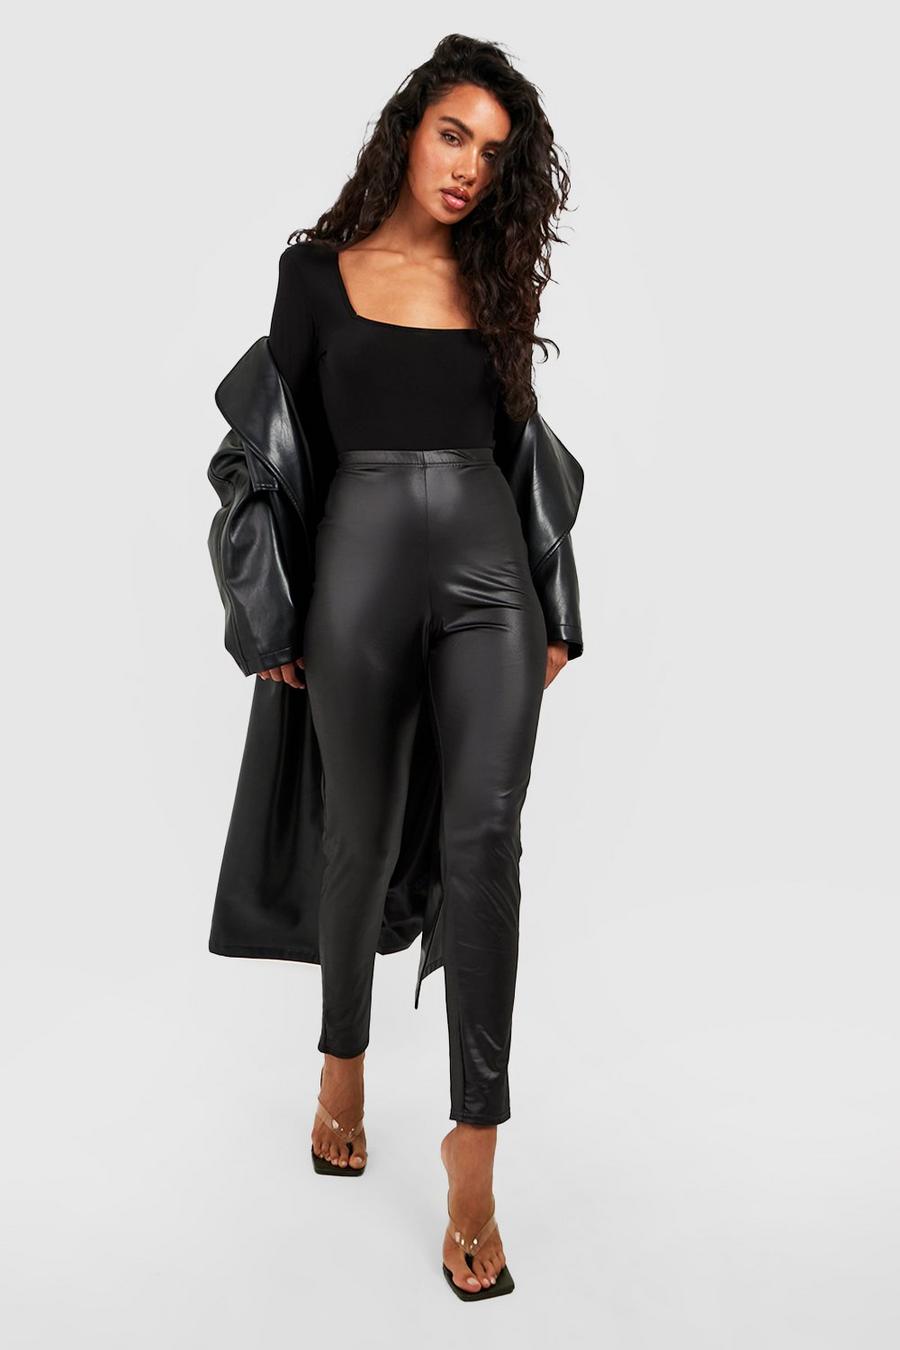 Missguided - Plus Size Faux Leather Trousers Black  Black leather pants, Plus  size leather pants, Outfits with leggings